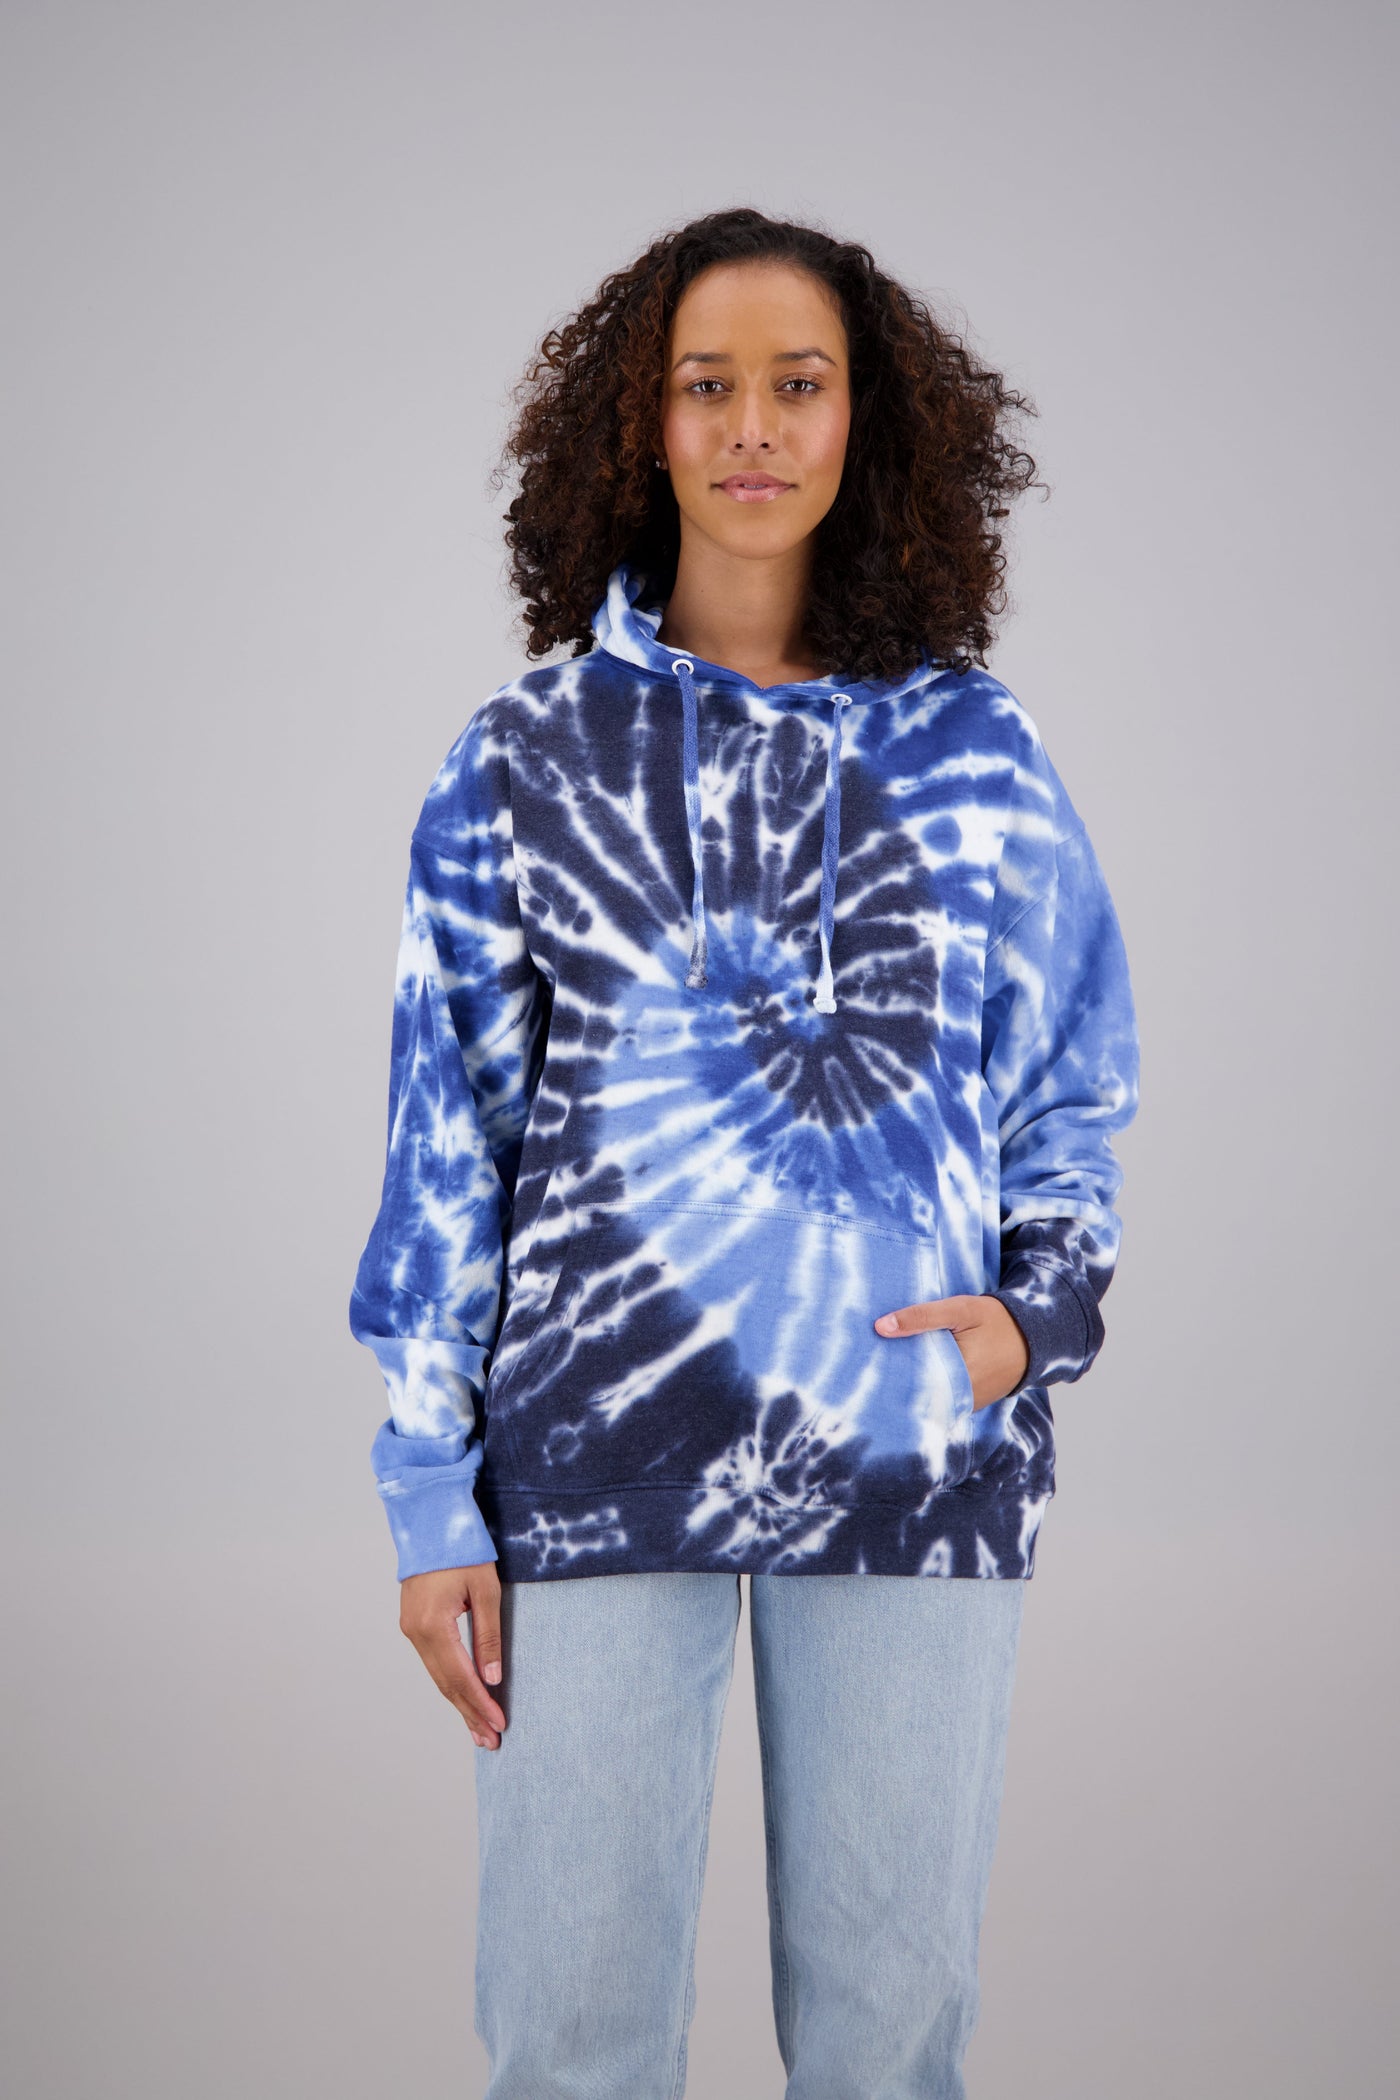 Adult's Tie-Dye Pullover Hoodie (2-XL) Cotton/Polyester Blend 9652